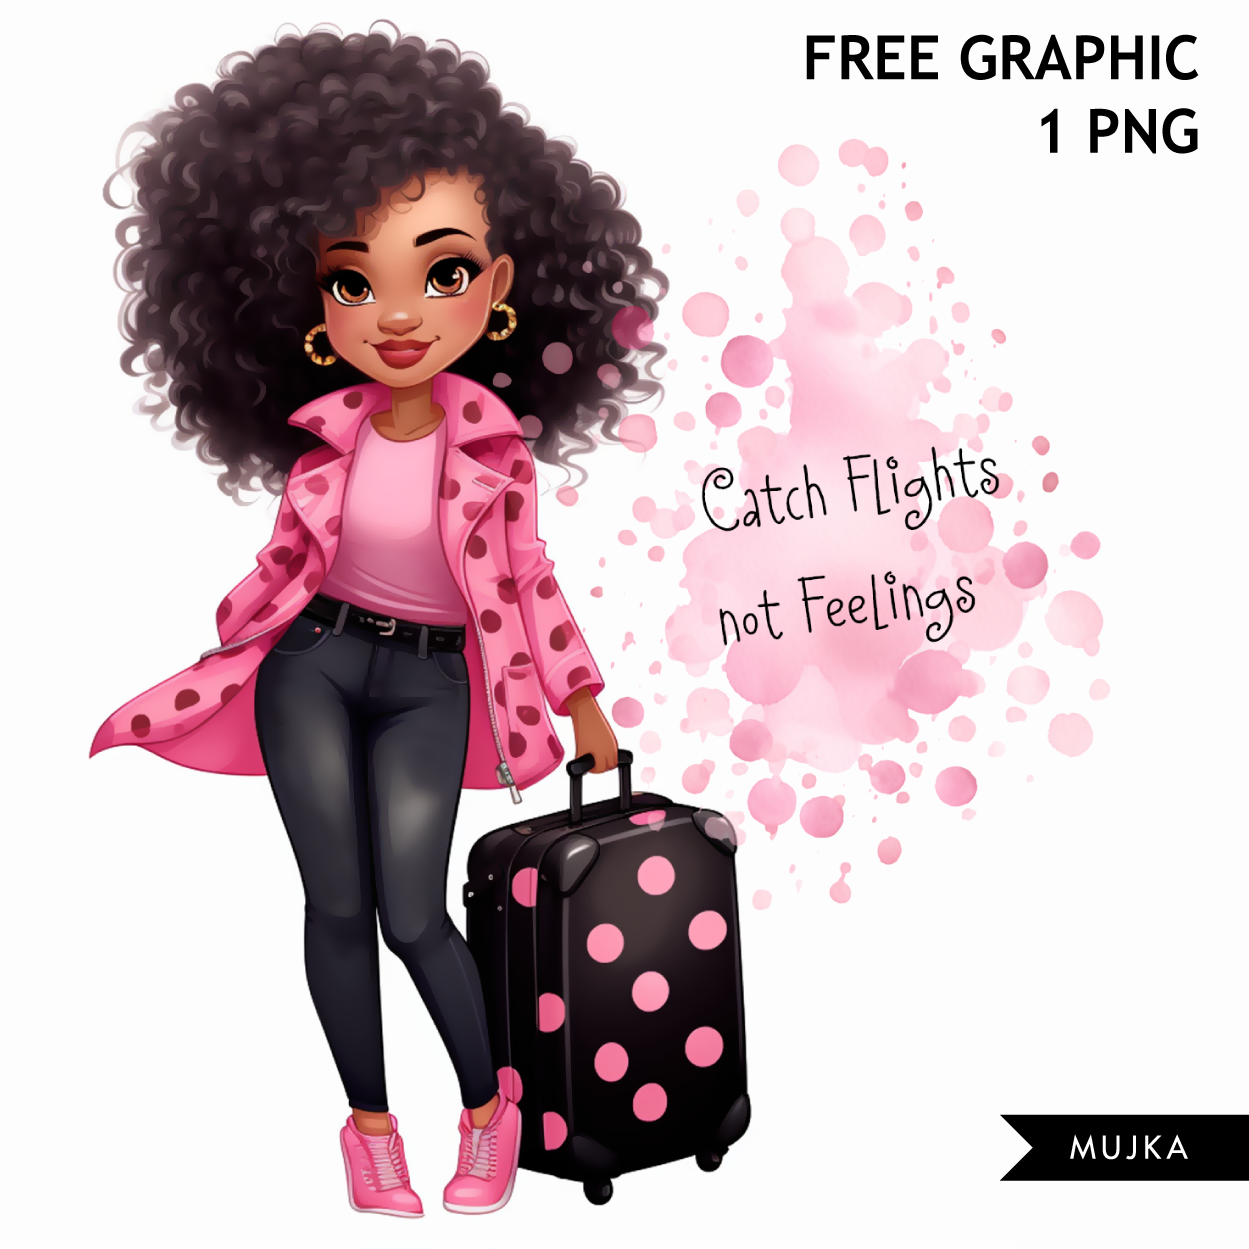 Free backpack-01 Clipart - Free Clipart Graphics, Images and